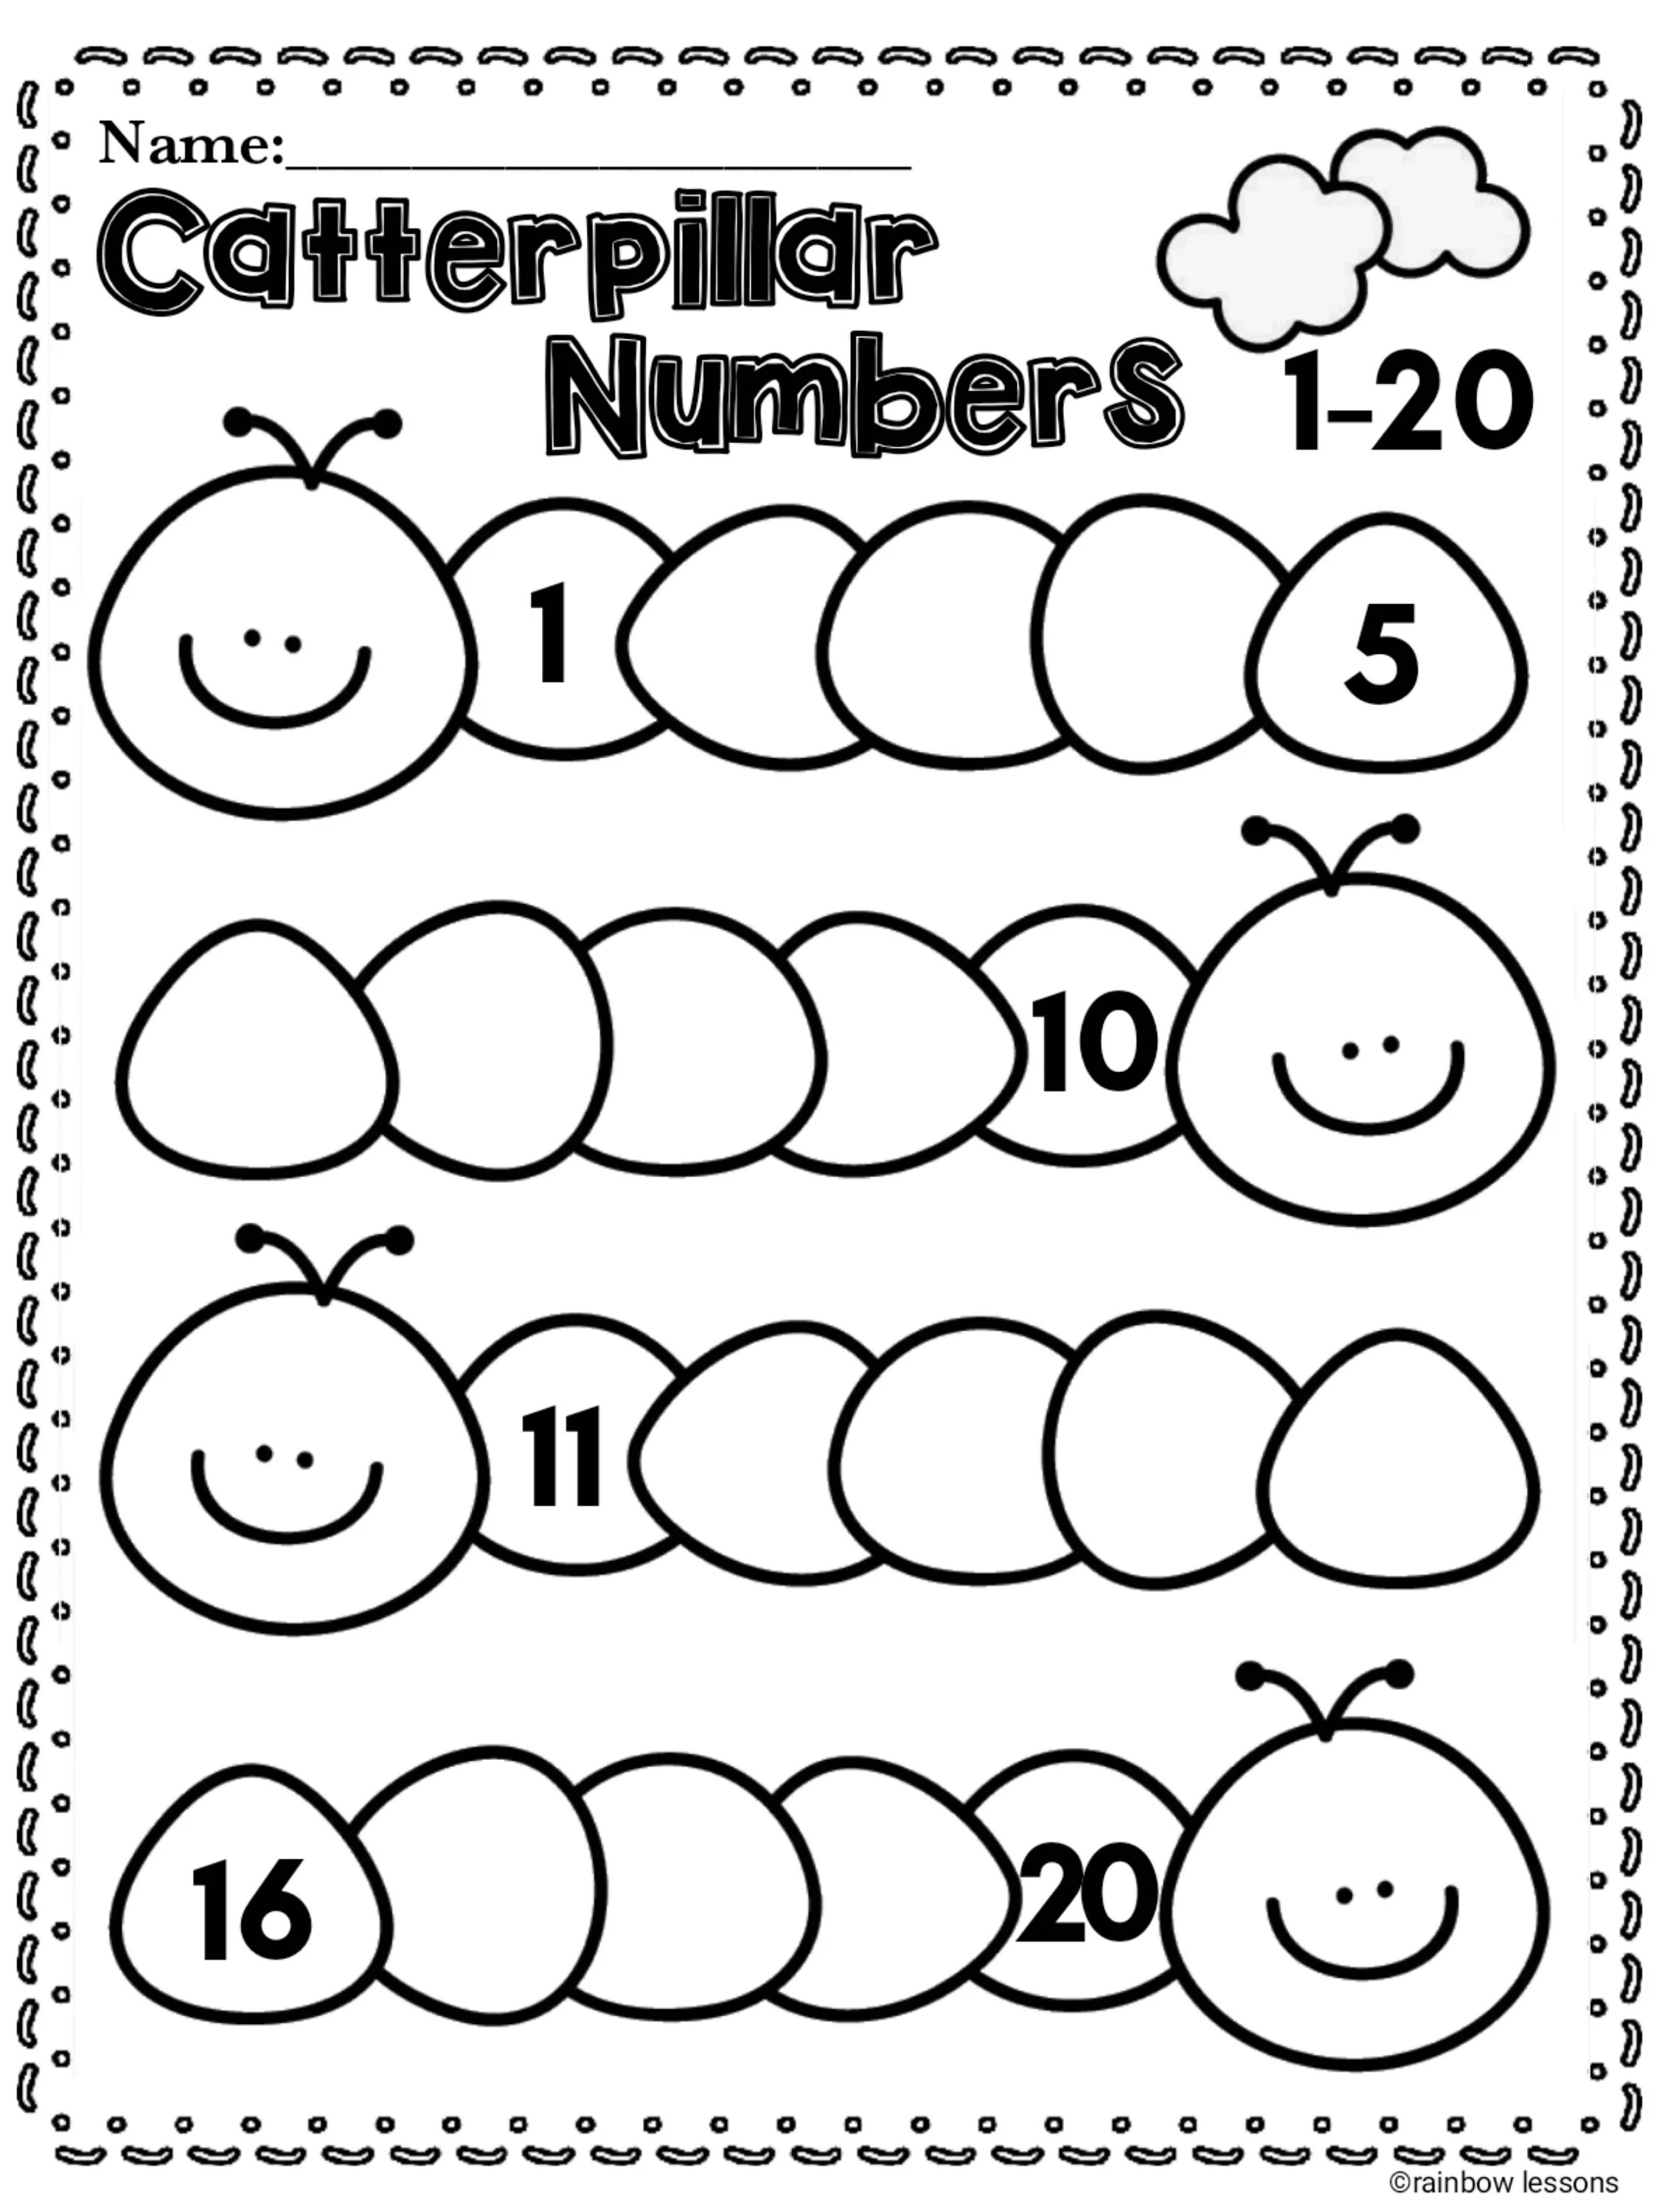 Numbers 1 20 worksheets. Numbers 1-17 Worksheets. Teen numbers activities. Counting to 15 Coloring.